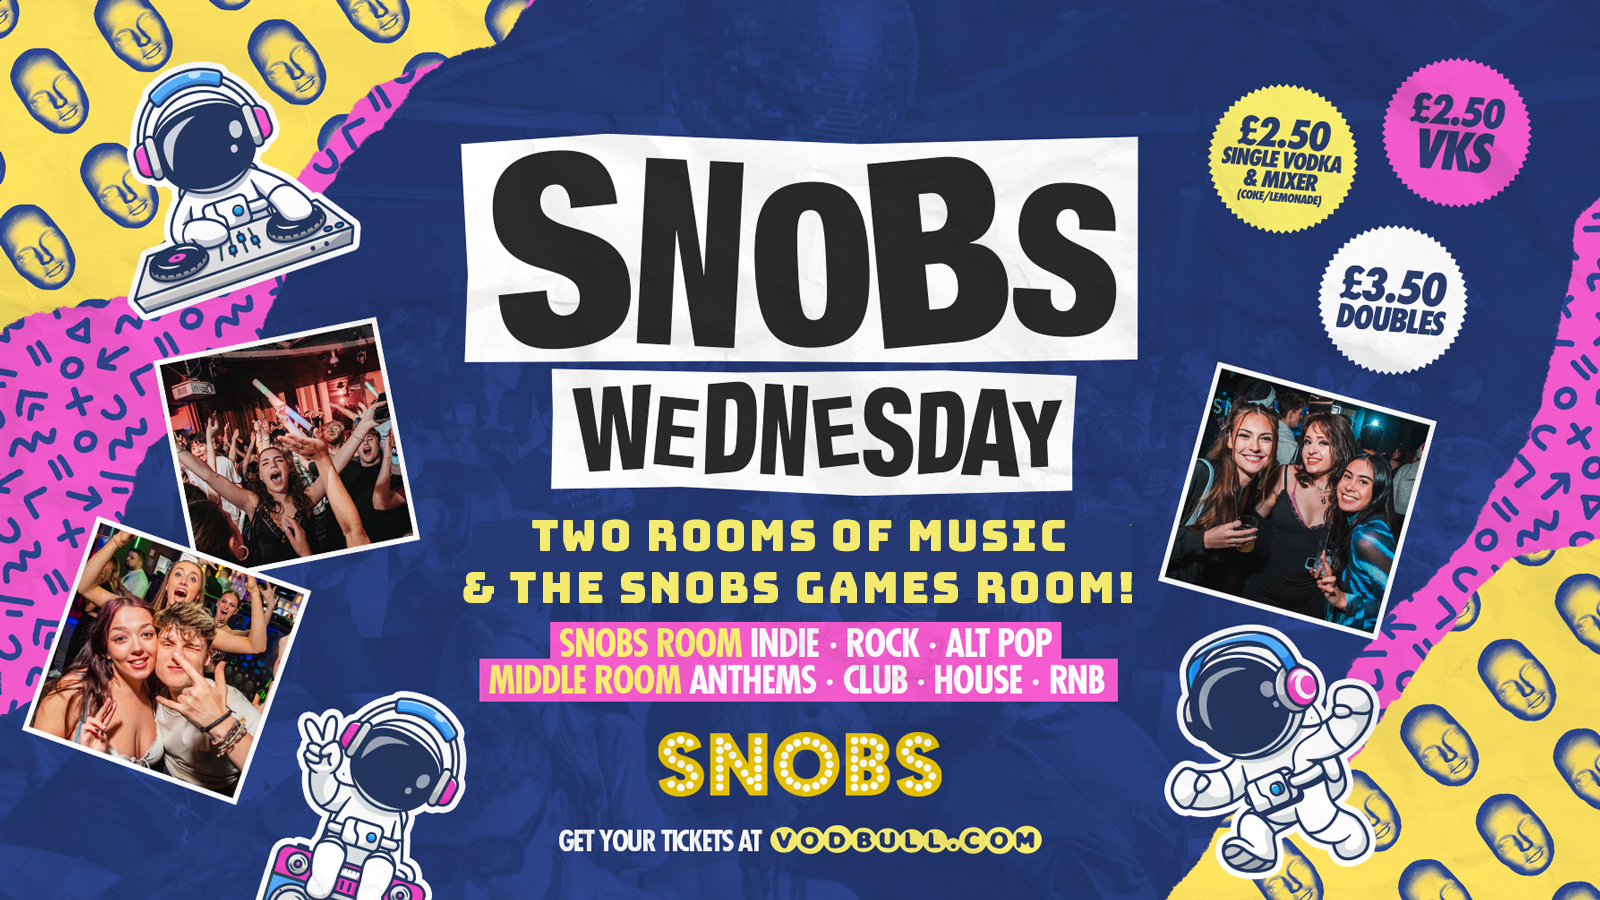 🎶 SNOBS WEDNESDAY!! [TONIGHT!] ⚠️PENULTIMATE Weds at SBQ⚠️ 🎶 Feat. TWO rooms of Music AND the Snobs Games room! 21/02